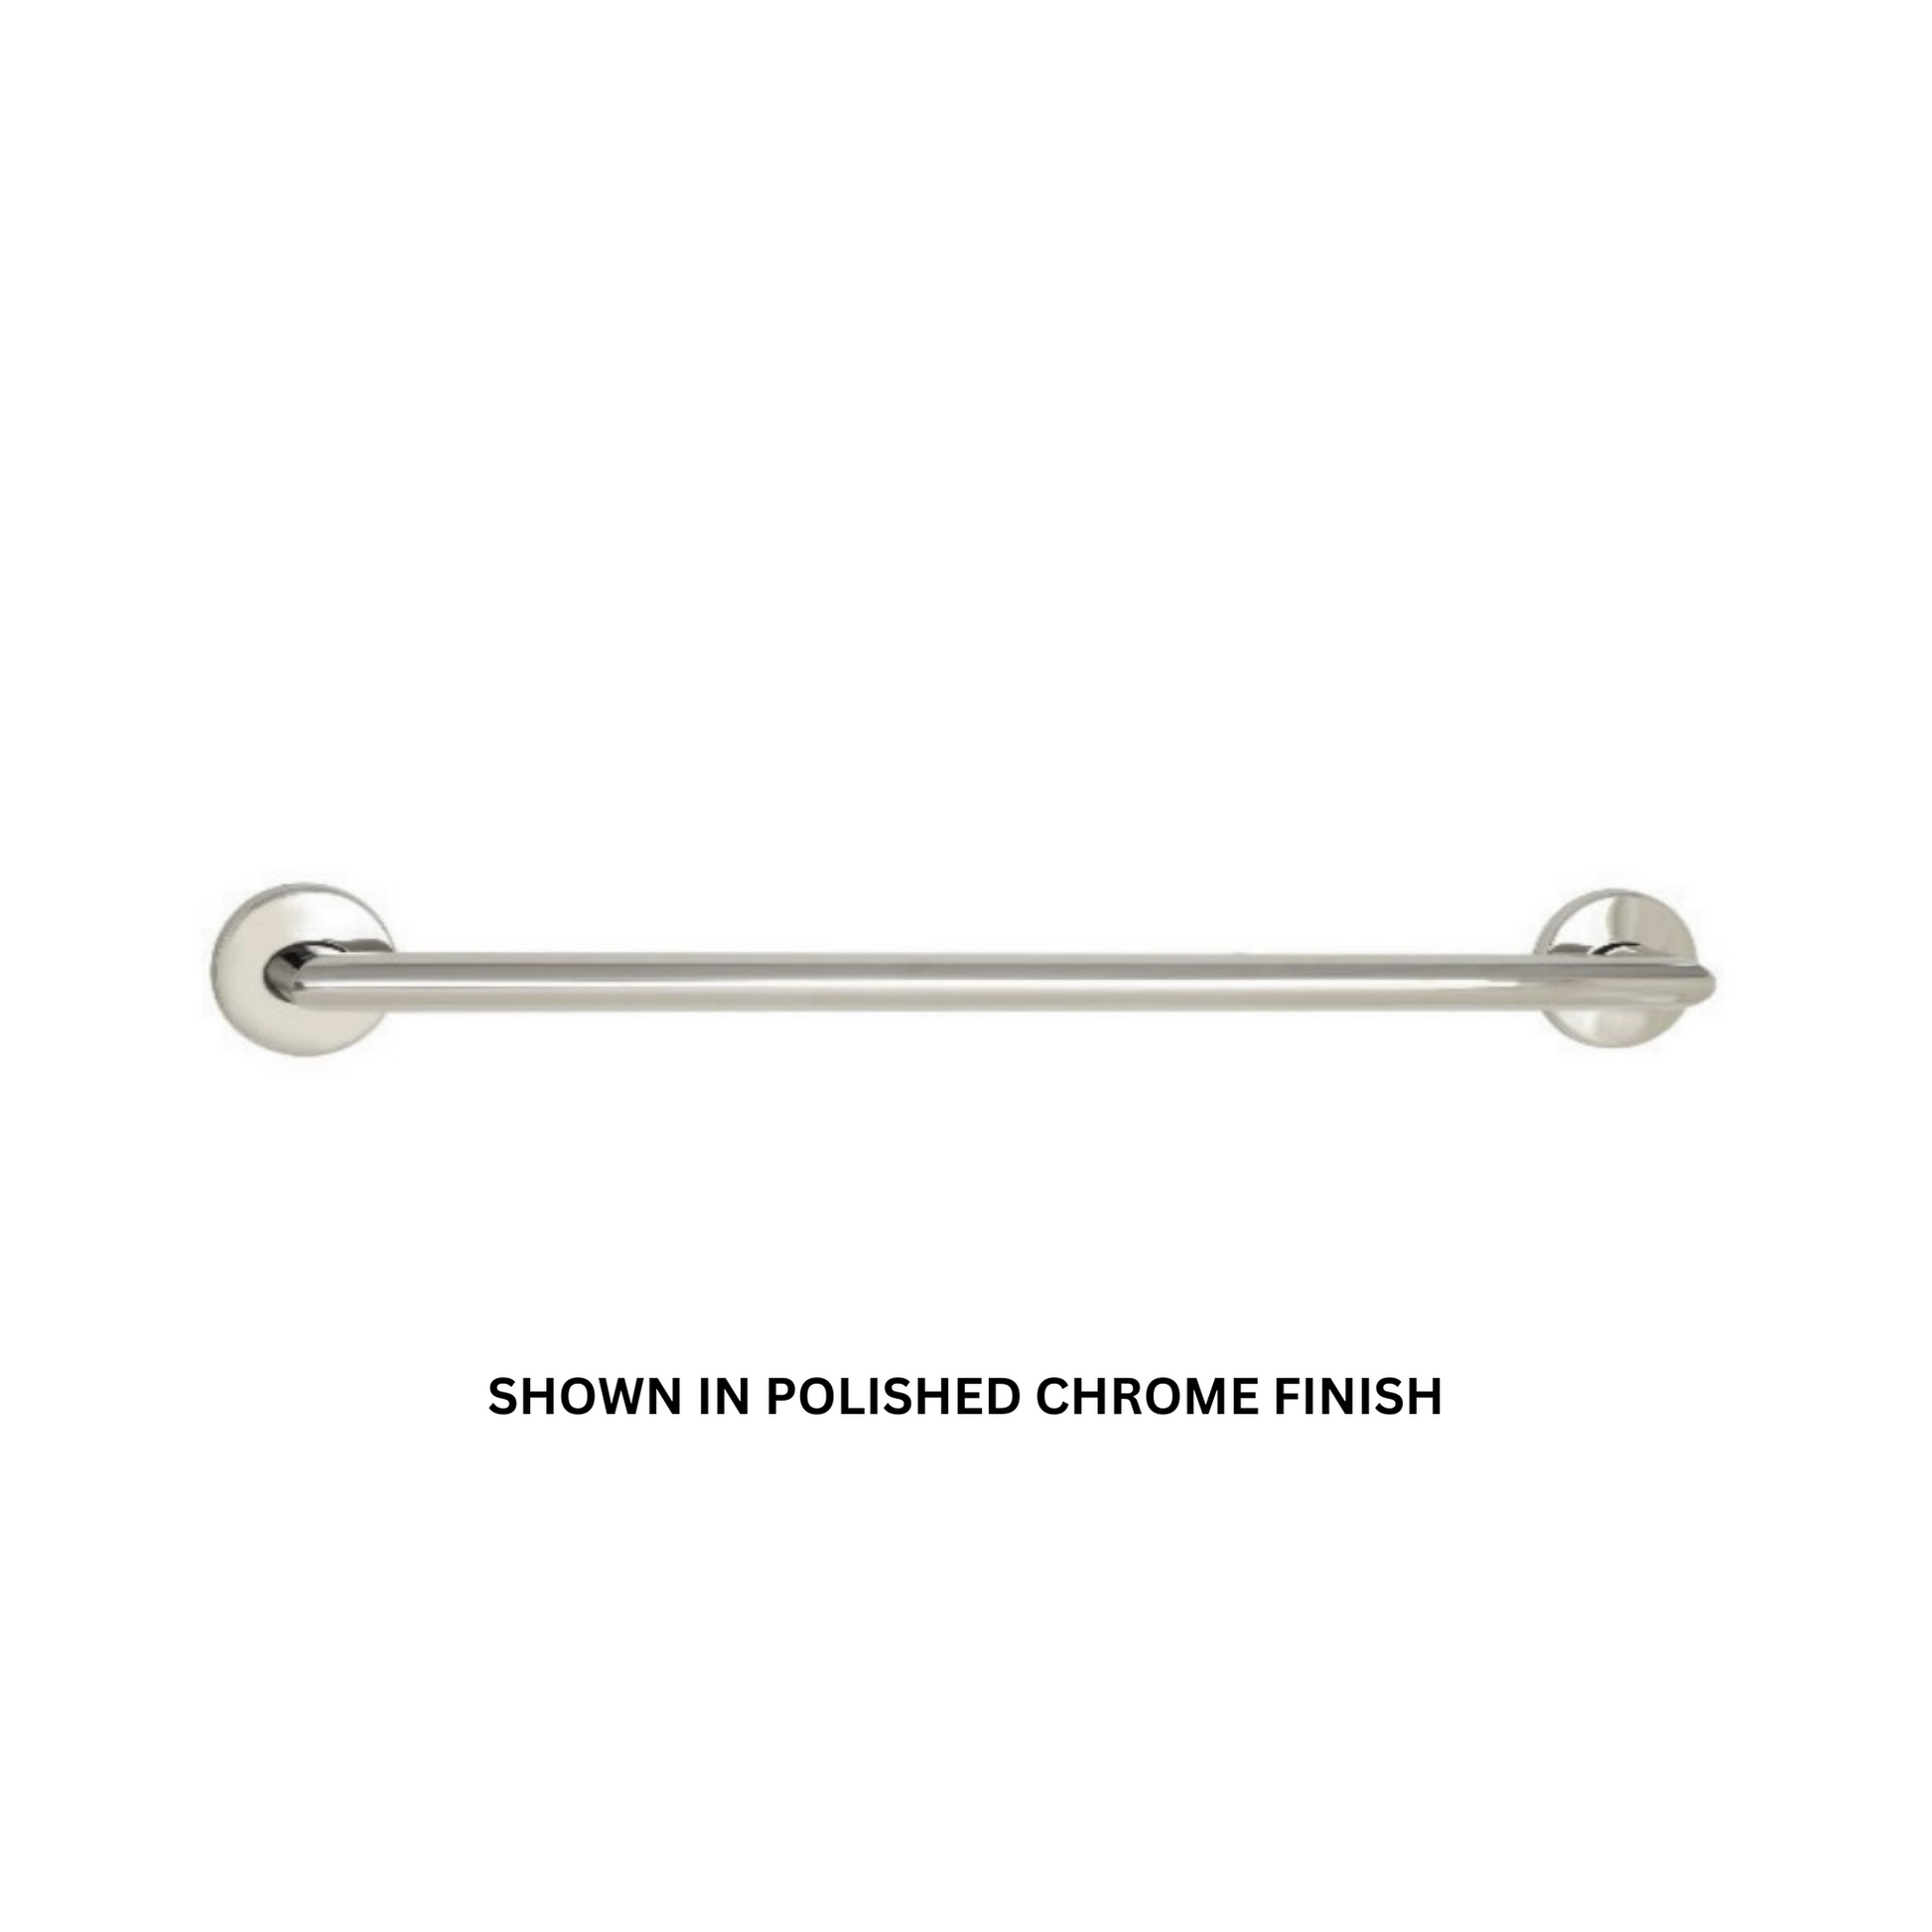 Seachrome Coronado 12" Bronze Powder Coat 1.5" Concealed Flanges Oval Grab Bar With Mitered Corners